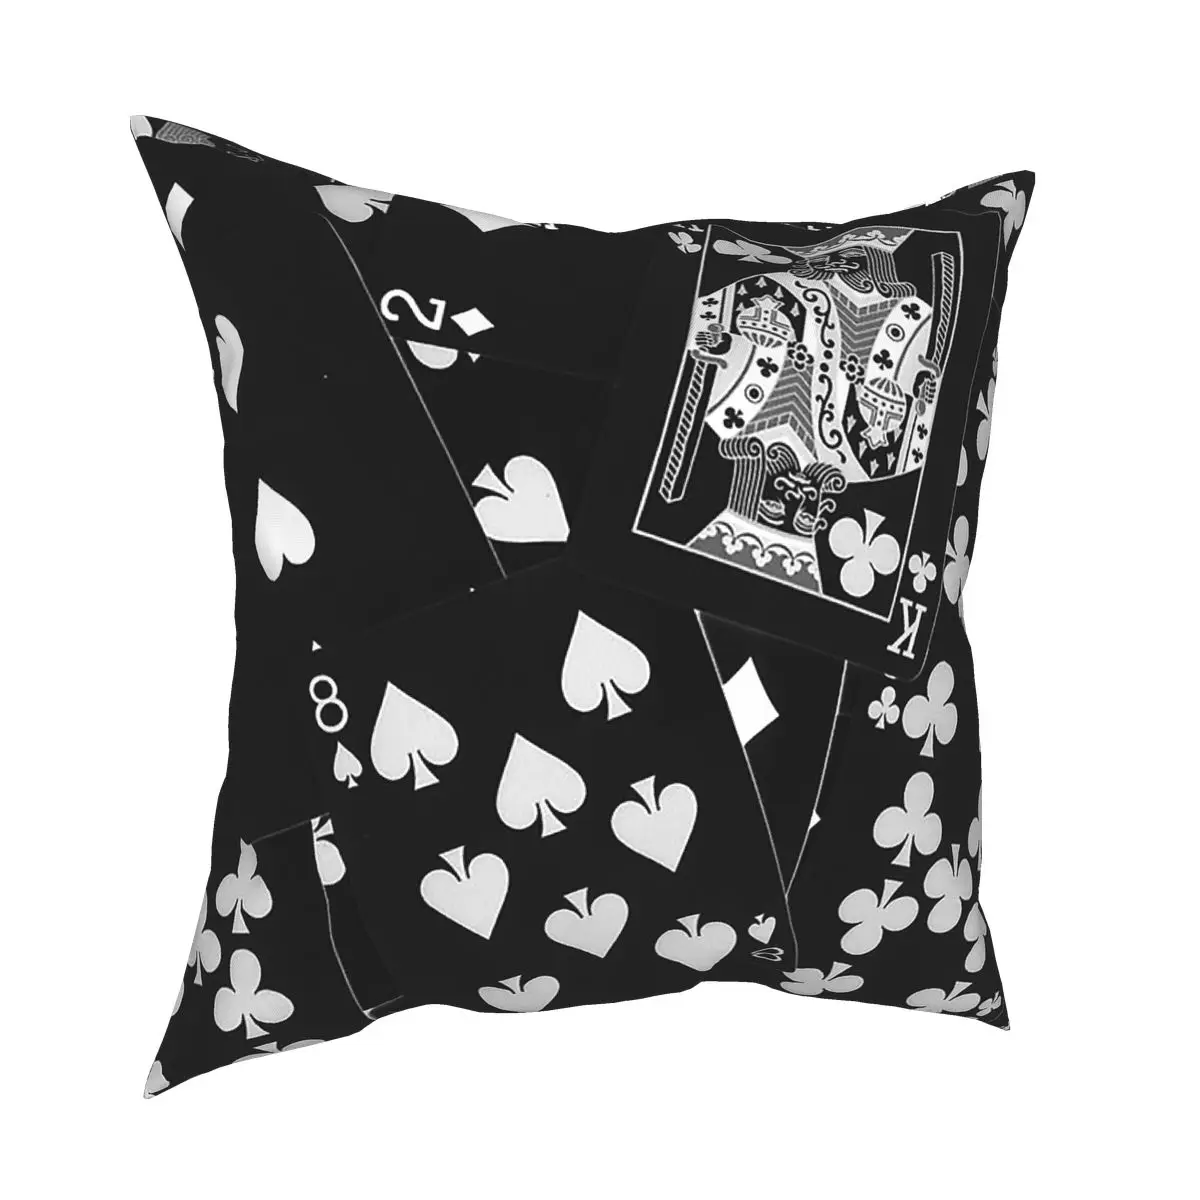 

Playing Cards Black White Pillowcase Home Decor Poker Cushion Cover Throw Pillow for Living Room Double-sided Printing Printed